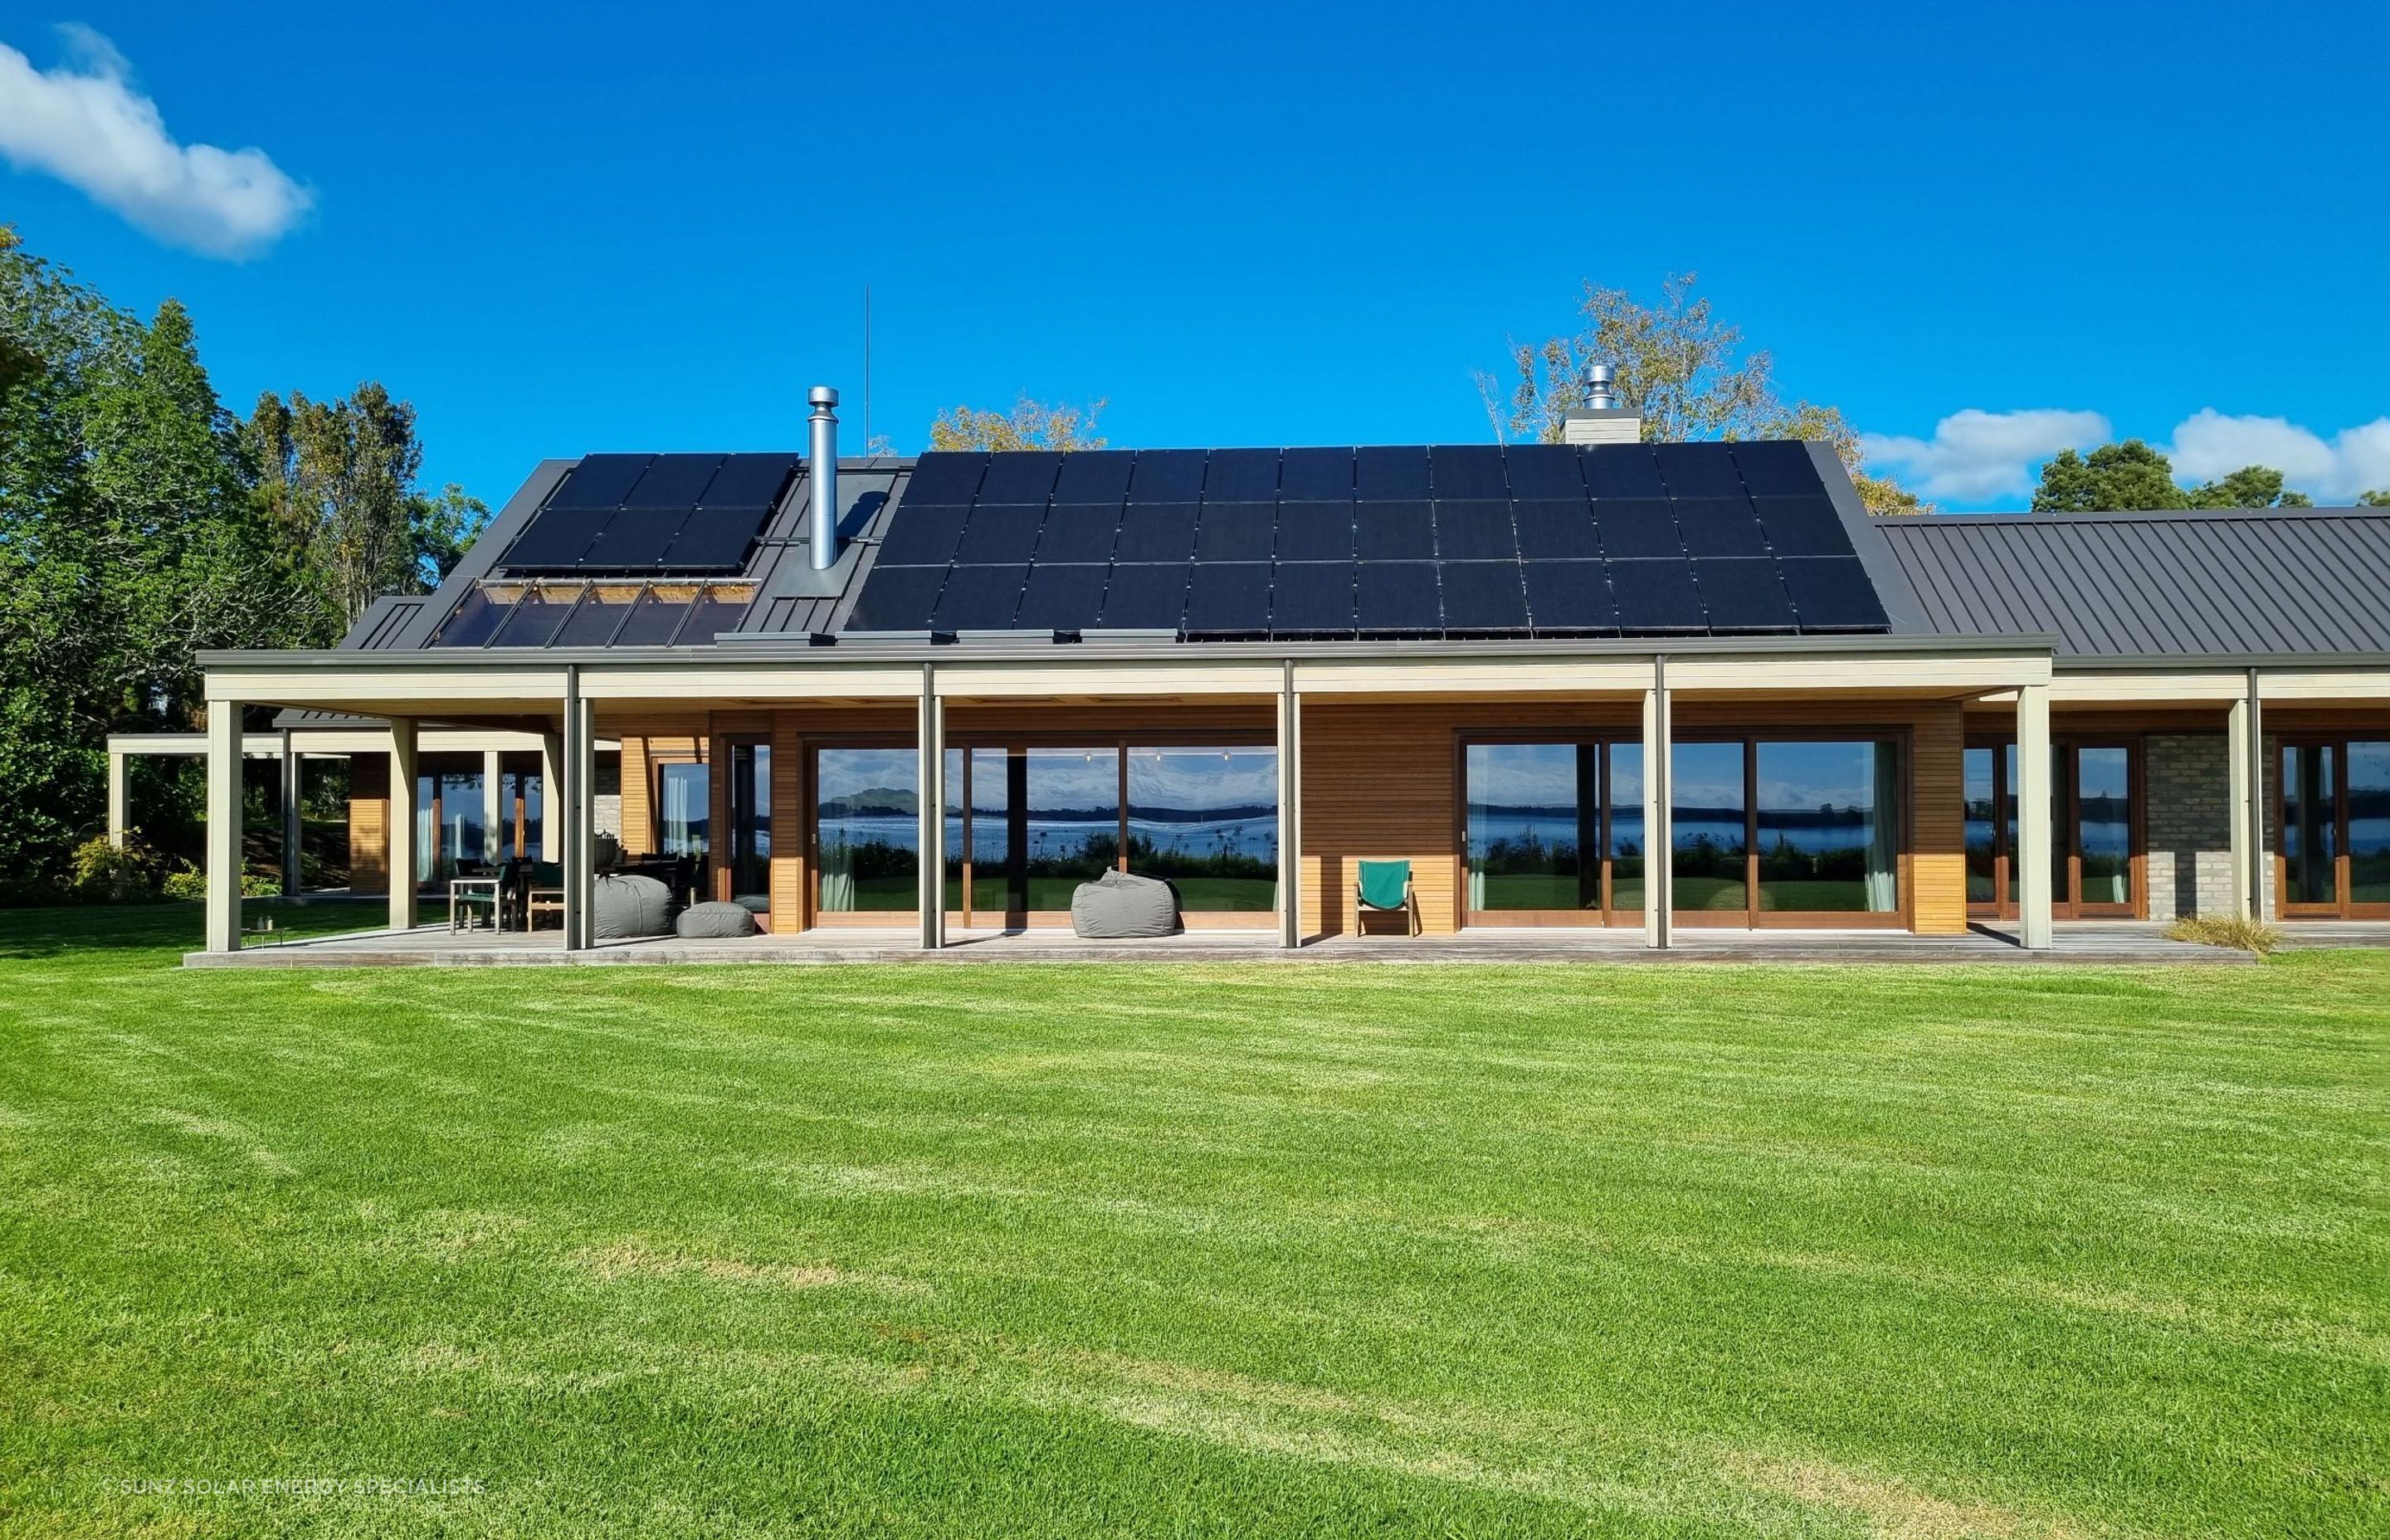 This Hybrid solar power system is an excellent example of modern, renewable energy being used in the home.